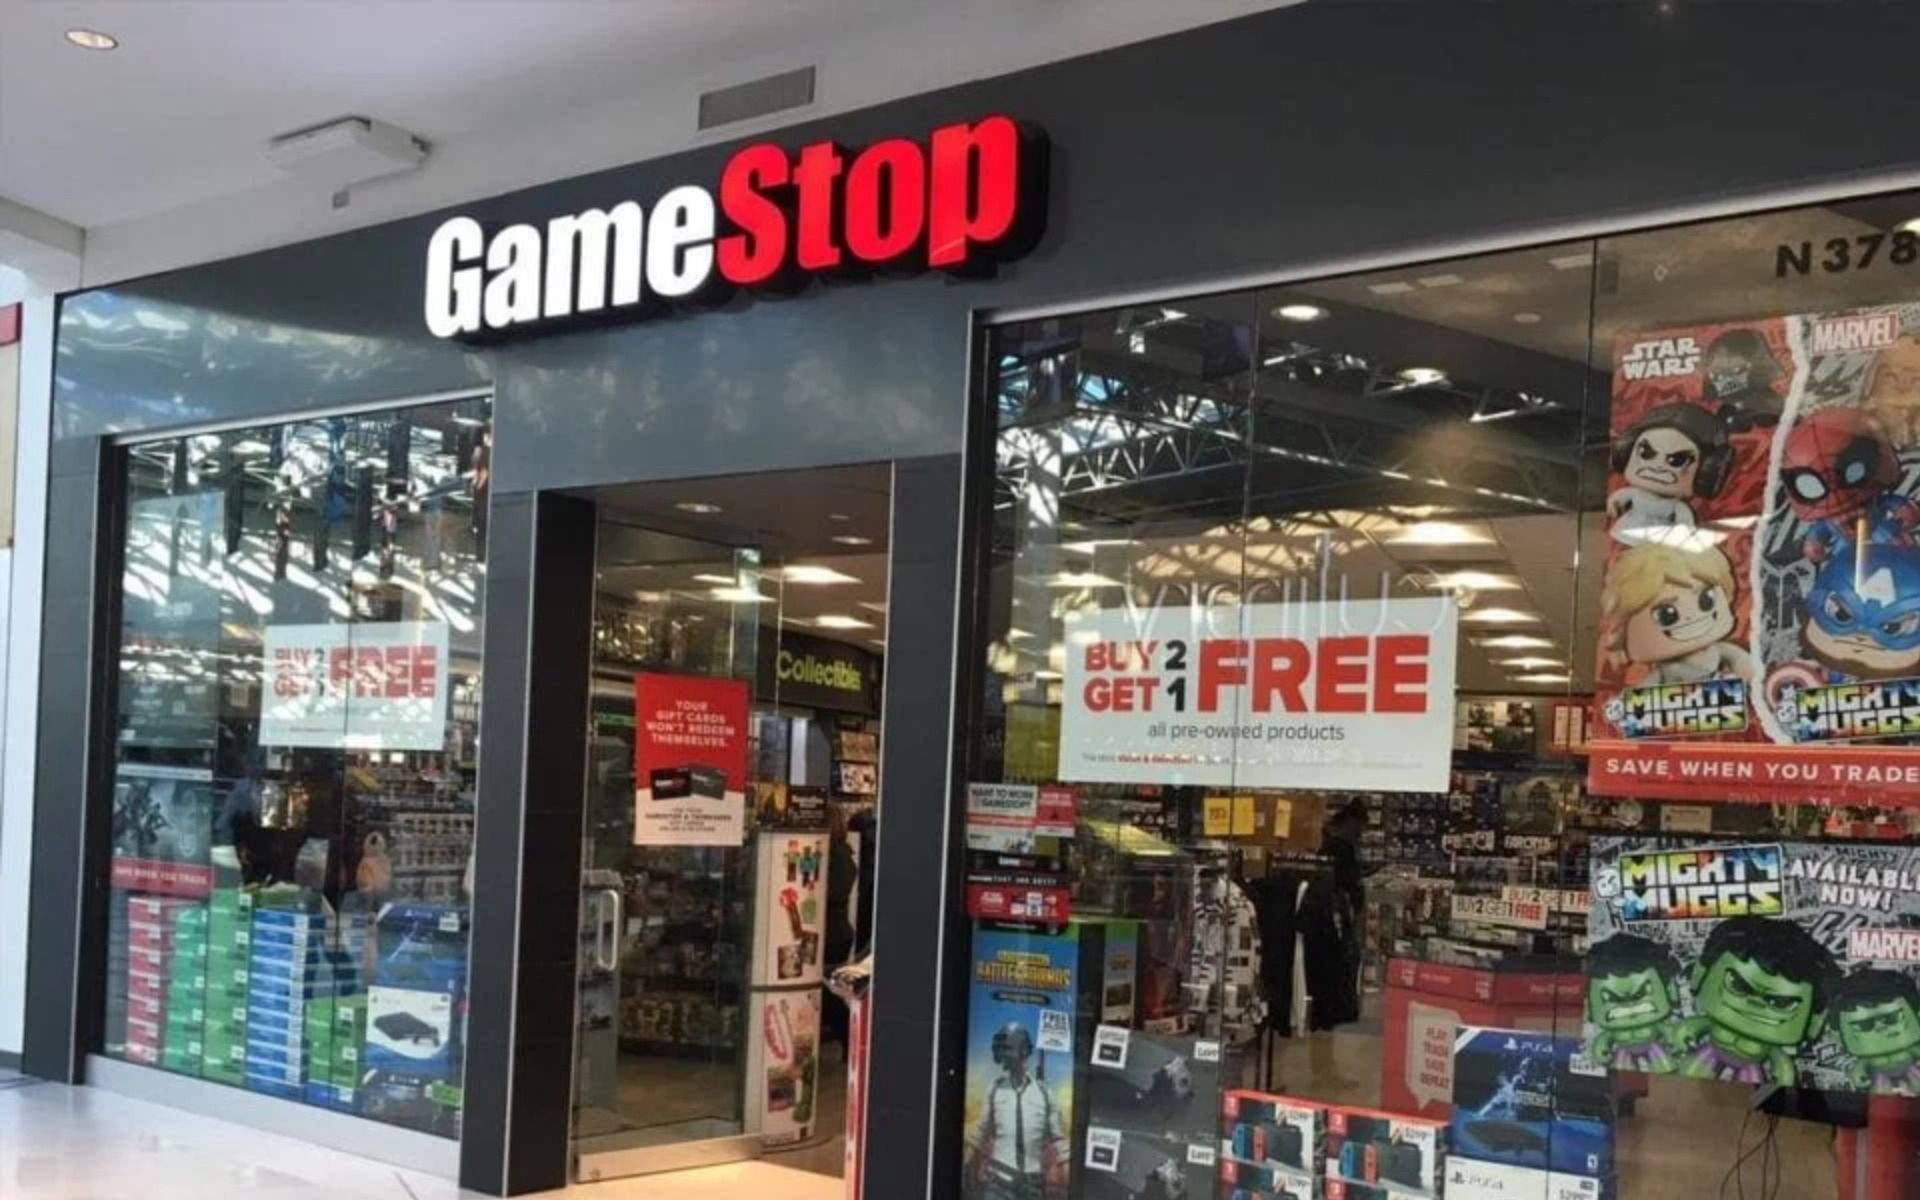 BREAKING: The GameStop Girl Showed Me Basic Human Kindness, See You Later Virgins